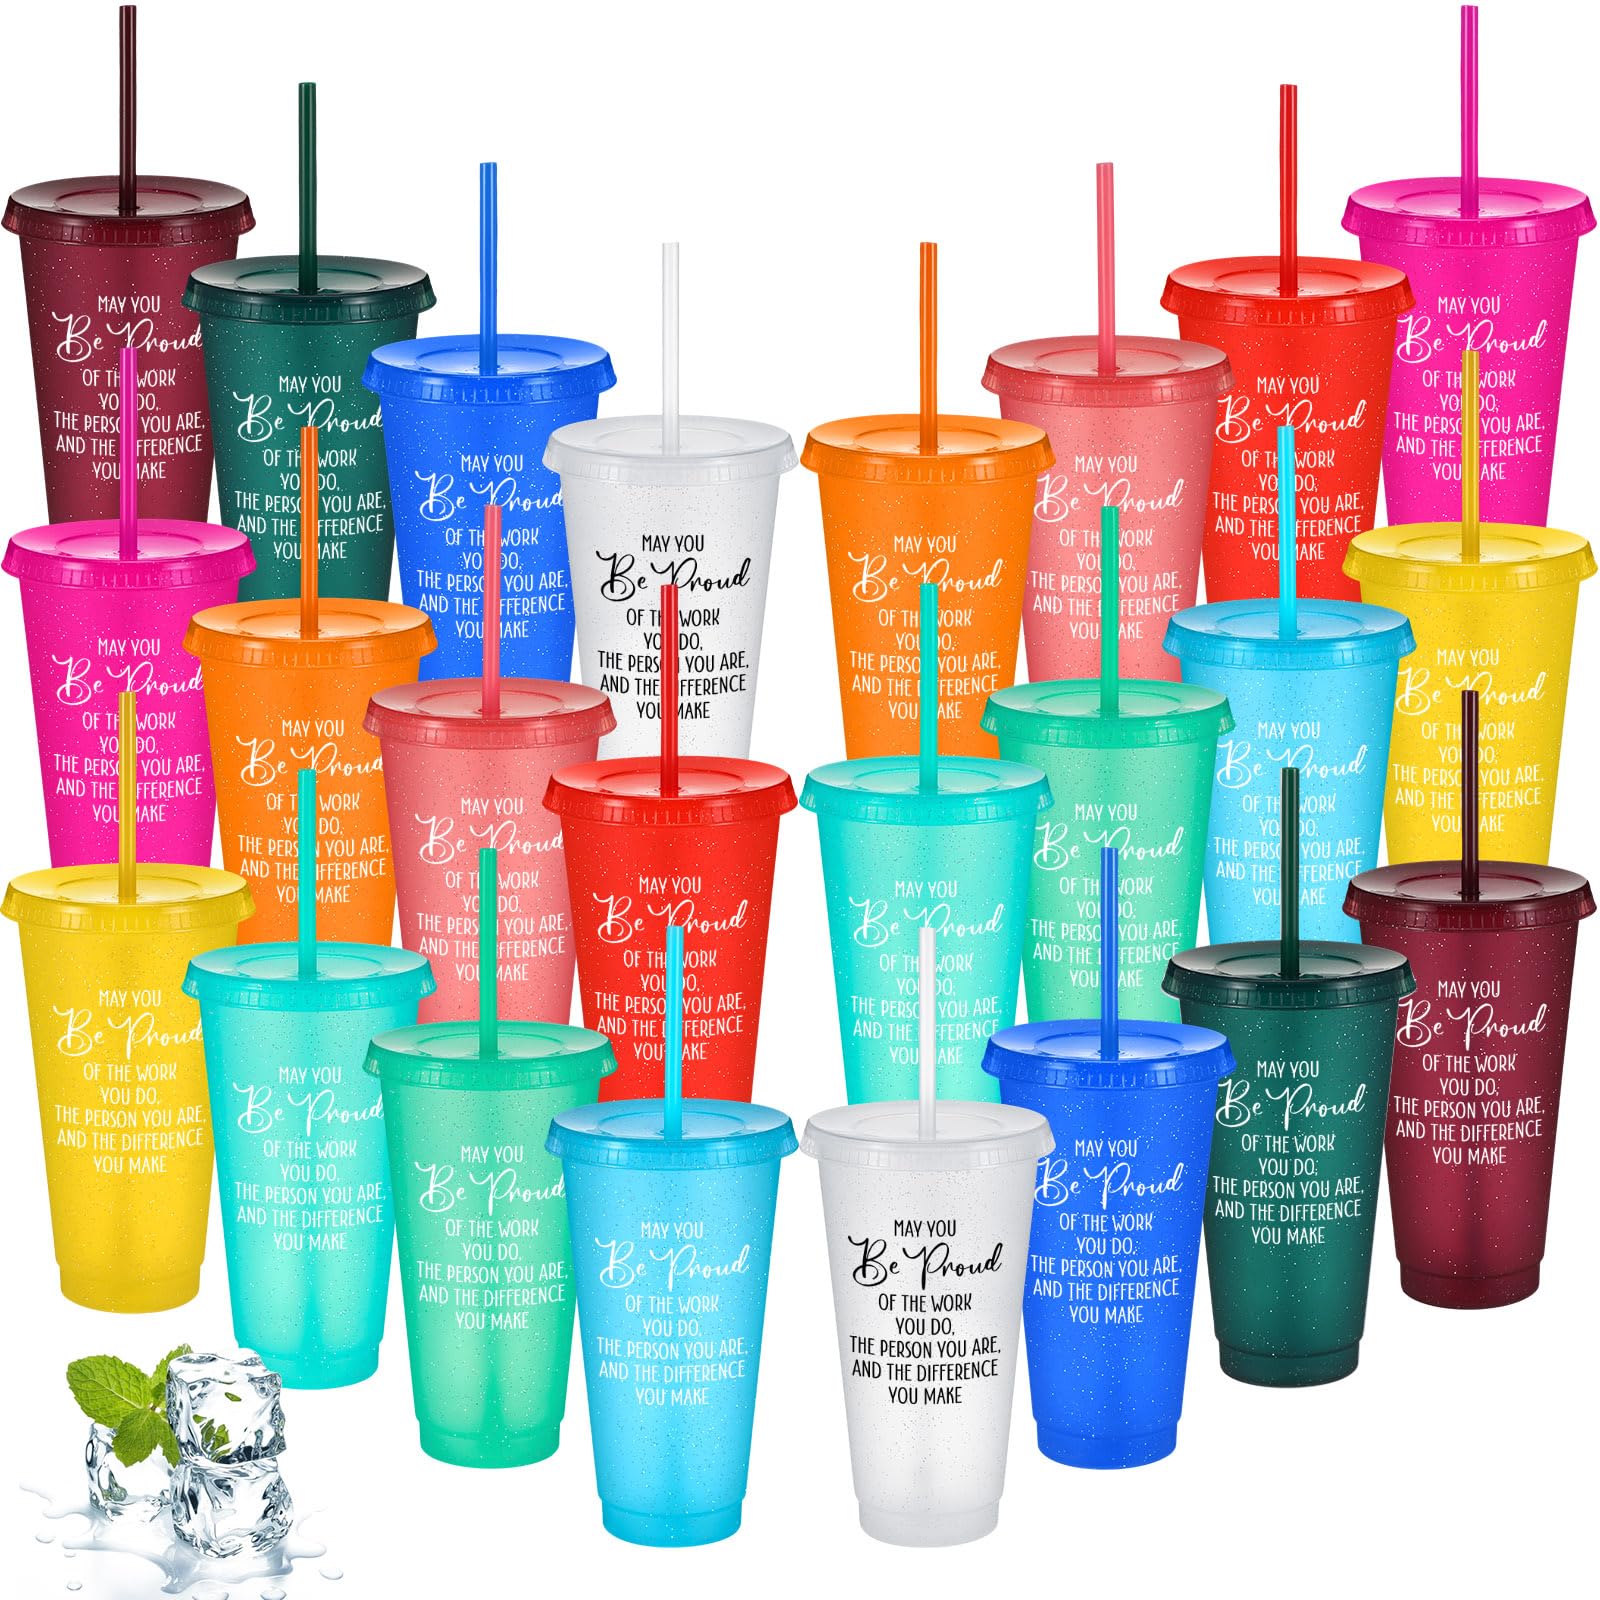 Gerrii Thank You Gift May You Be Proud Of The Work You Do Plastic Tumblers with Straws Lid Inspirational Reusable Glitter Plastic cup Travel Mug Appreciation Gift for Coworker Employee(24 oz, 24 Pcs)